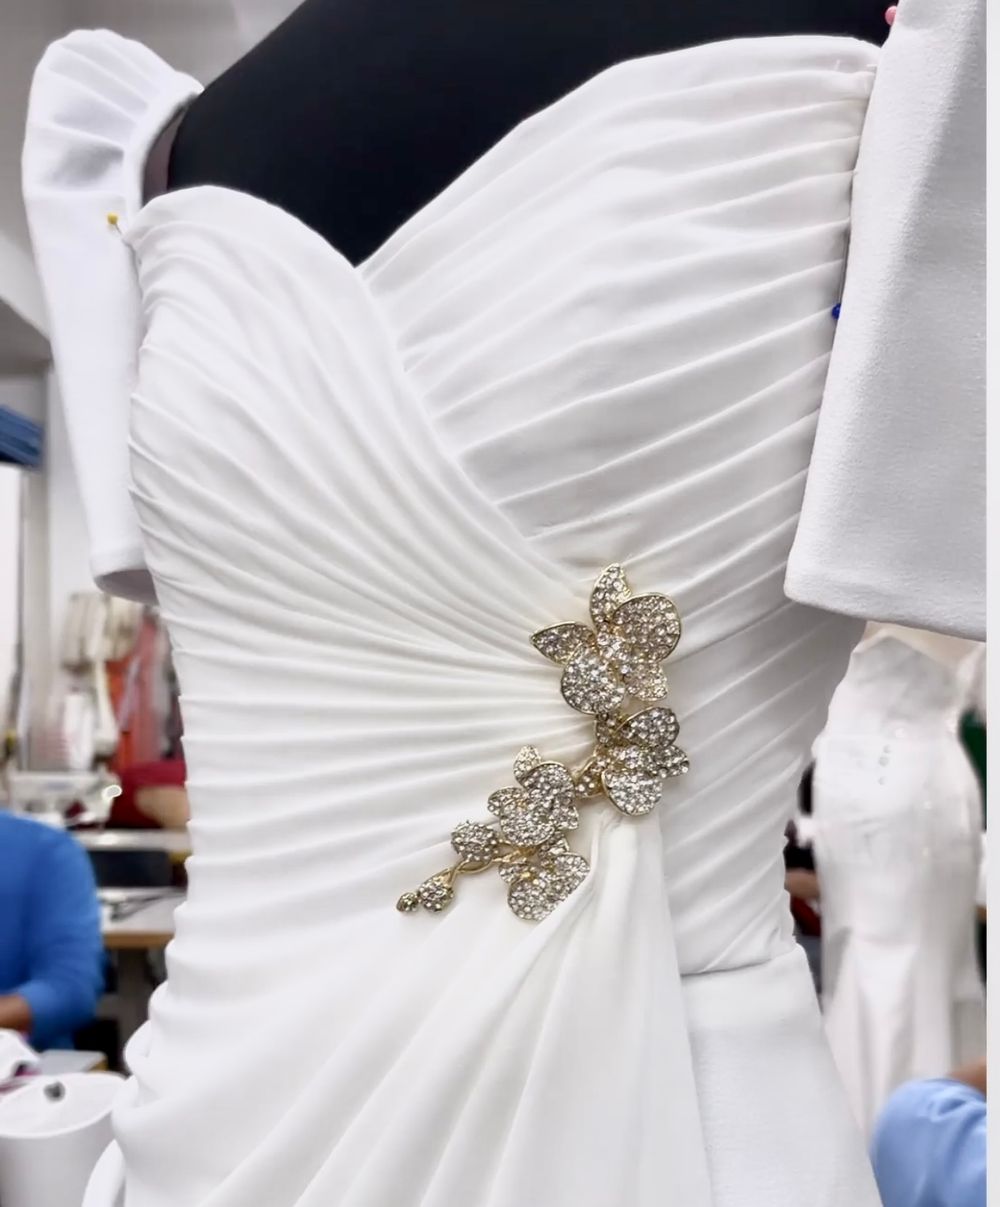 Mark Bumgarner adds a custom sampaguita brooch as the complementary piece of Toni's inaugural gown.